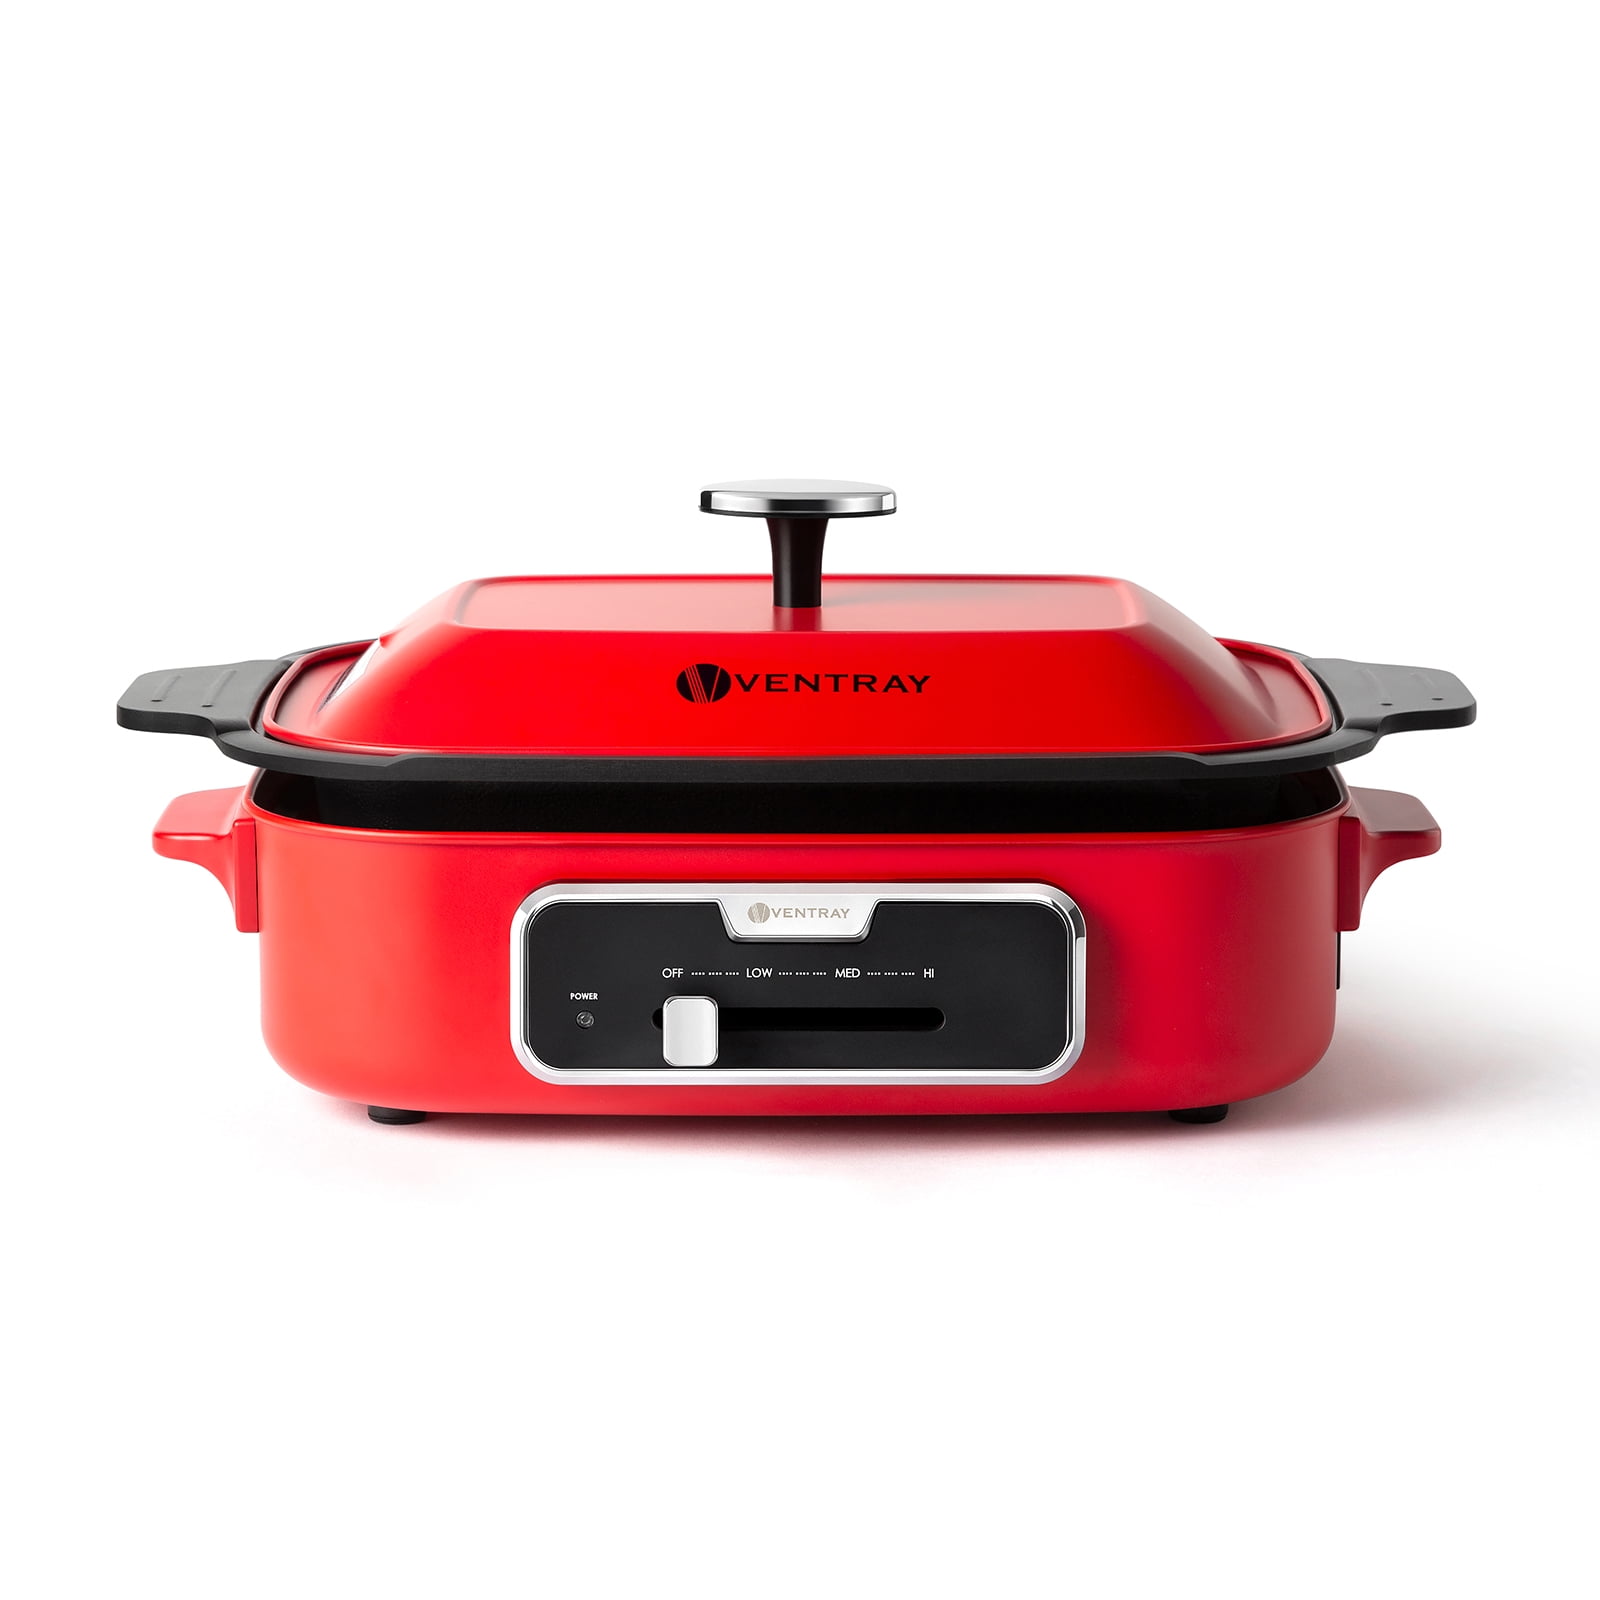 Ventray 1200W Smokeless indoor Grill, Table-top Griddle Plate with Interchangeable Nonstick Pan, Easy Control - Red | Walmart Canada